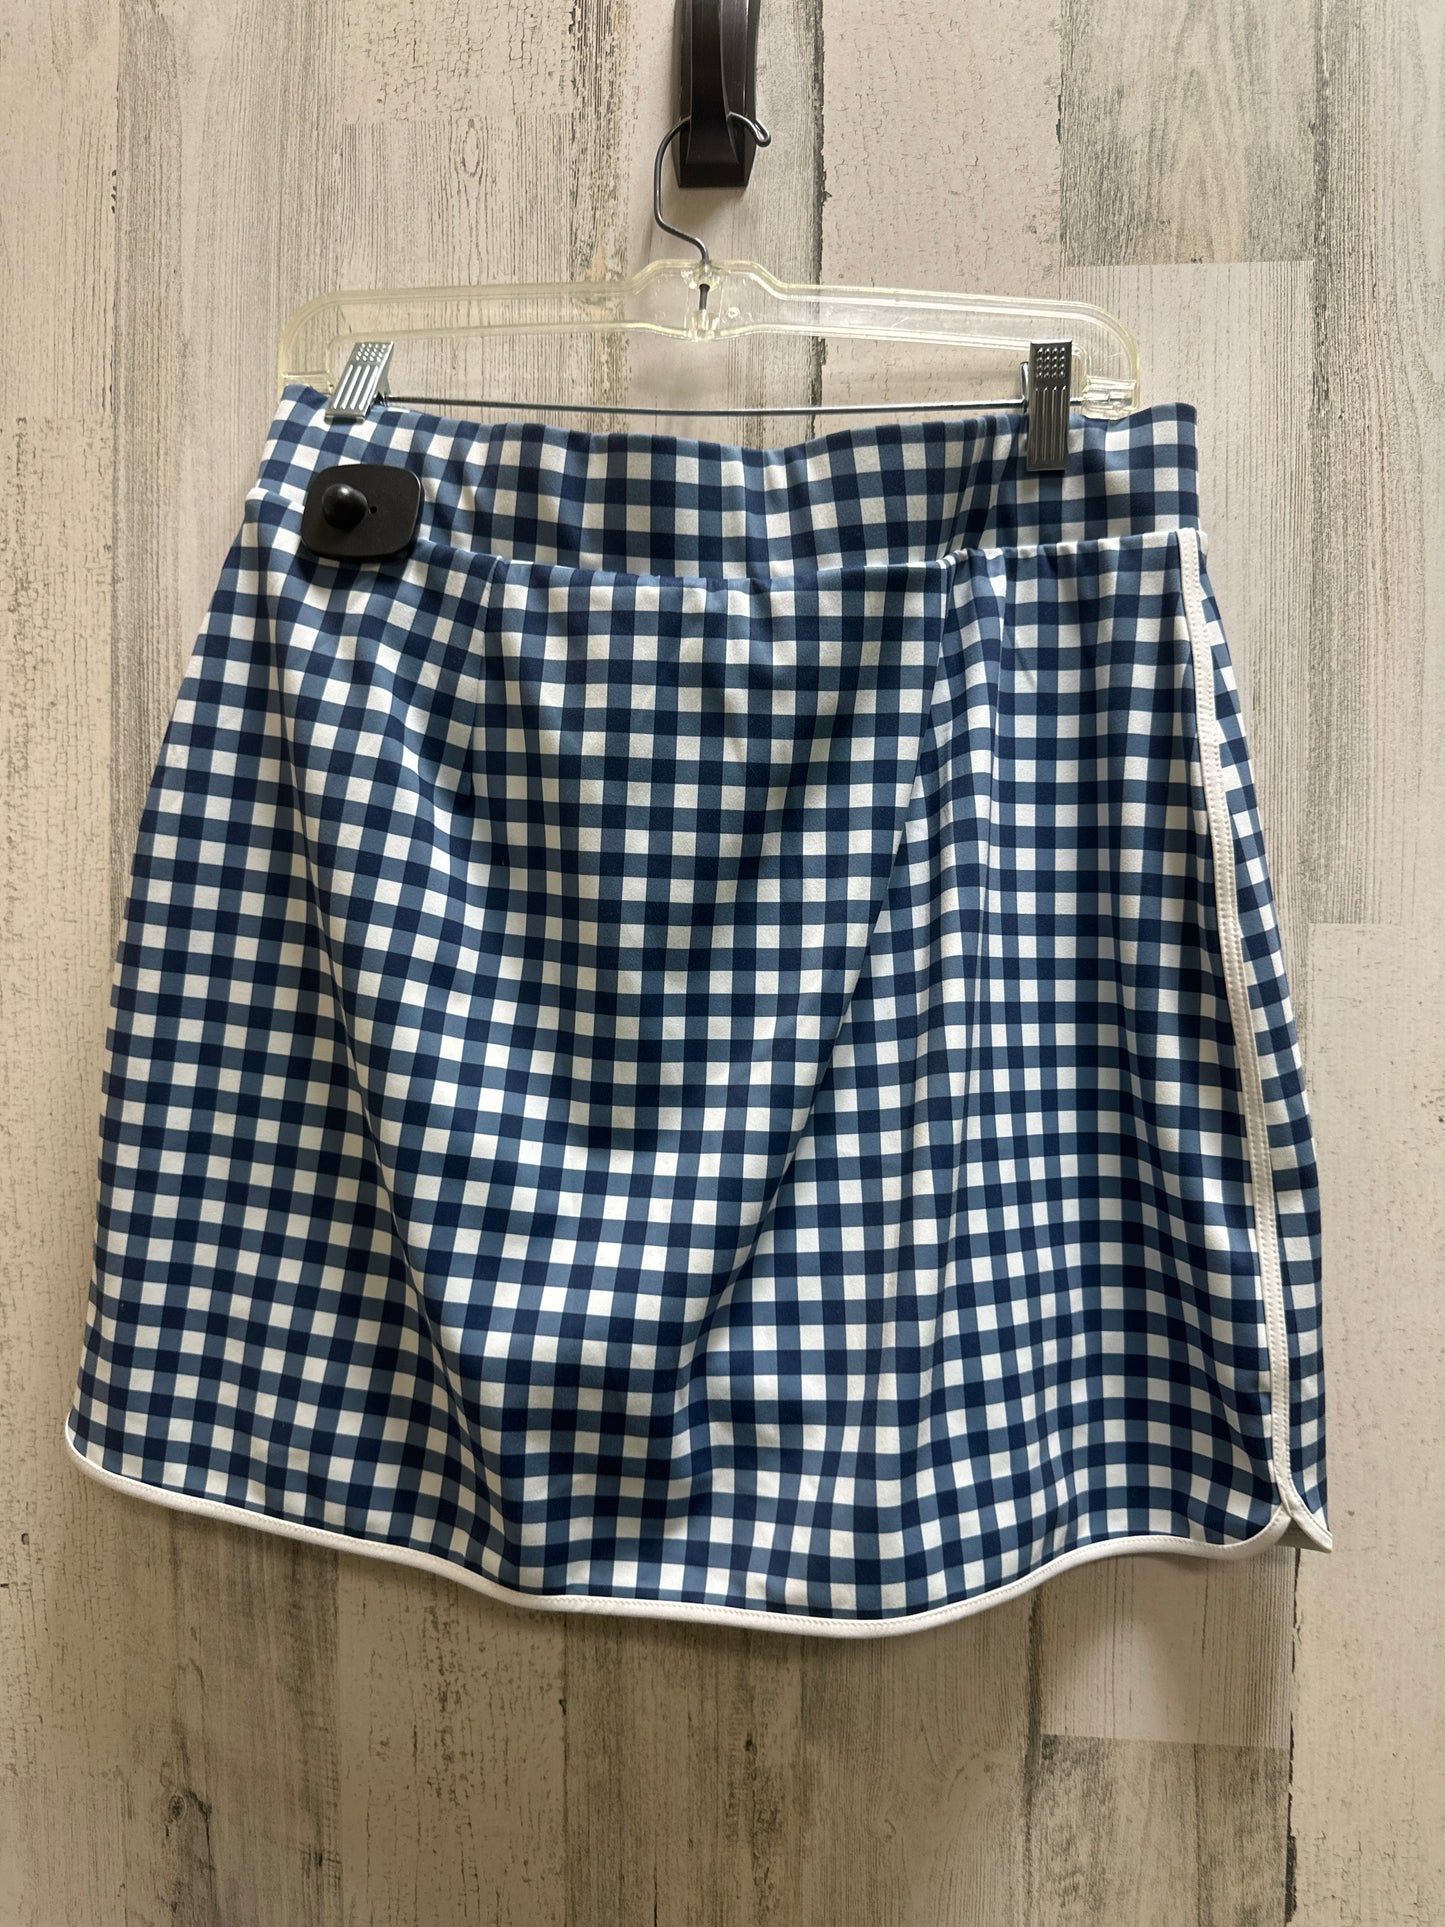 Athletic Skirt By J. Crew  Size: L